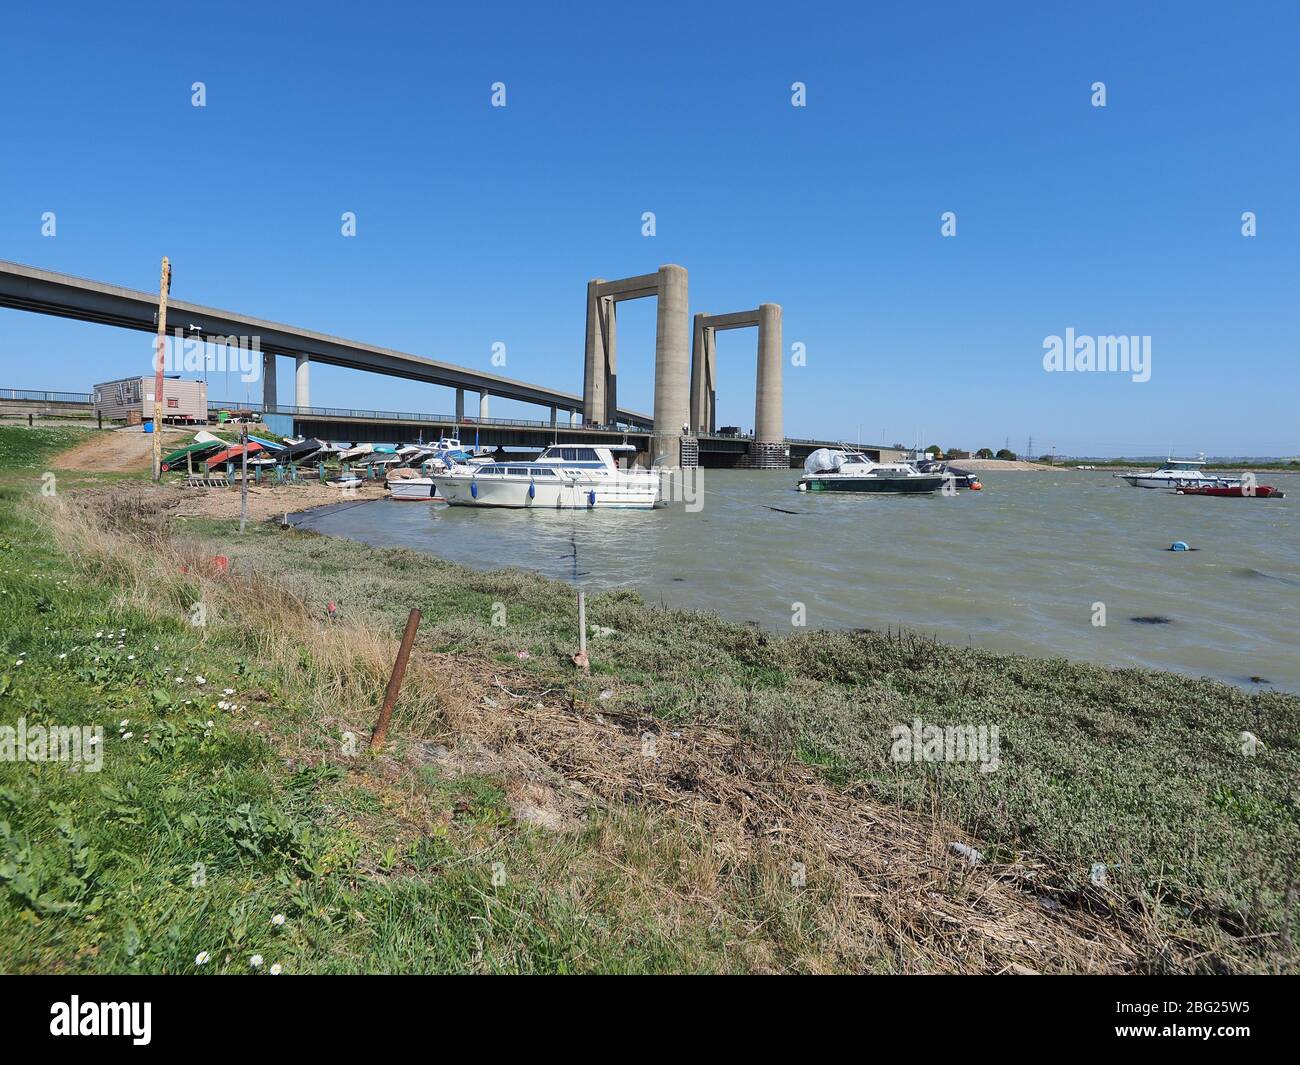 Iwade, Kent, UK. 20th Apr, 2020. Today is the 60th anniversary of the distinctive Kingsferry Bridge, linking Isle of Sheppey with mainland Kent, being opened by the Duchess of Kent on 20 Apr, 1960. At the time it was the largest lifting bridge built in Britain since the Second World War. There is only one other similar design in the world based in Holland. In 2006, the infamous Sheppey Crossing was opened, but Kingsferry was retained for rail and road traffic. A generator is in situ for lifting the centre span as the power system needs a replacement part. Credit: James Bell/Alamy Live News Stock Photo